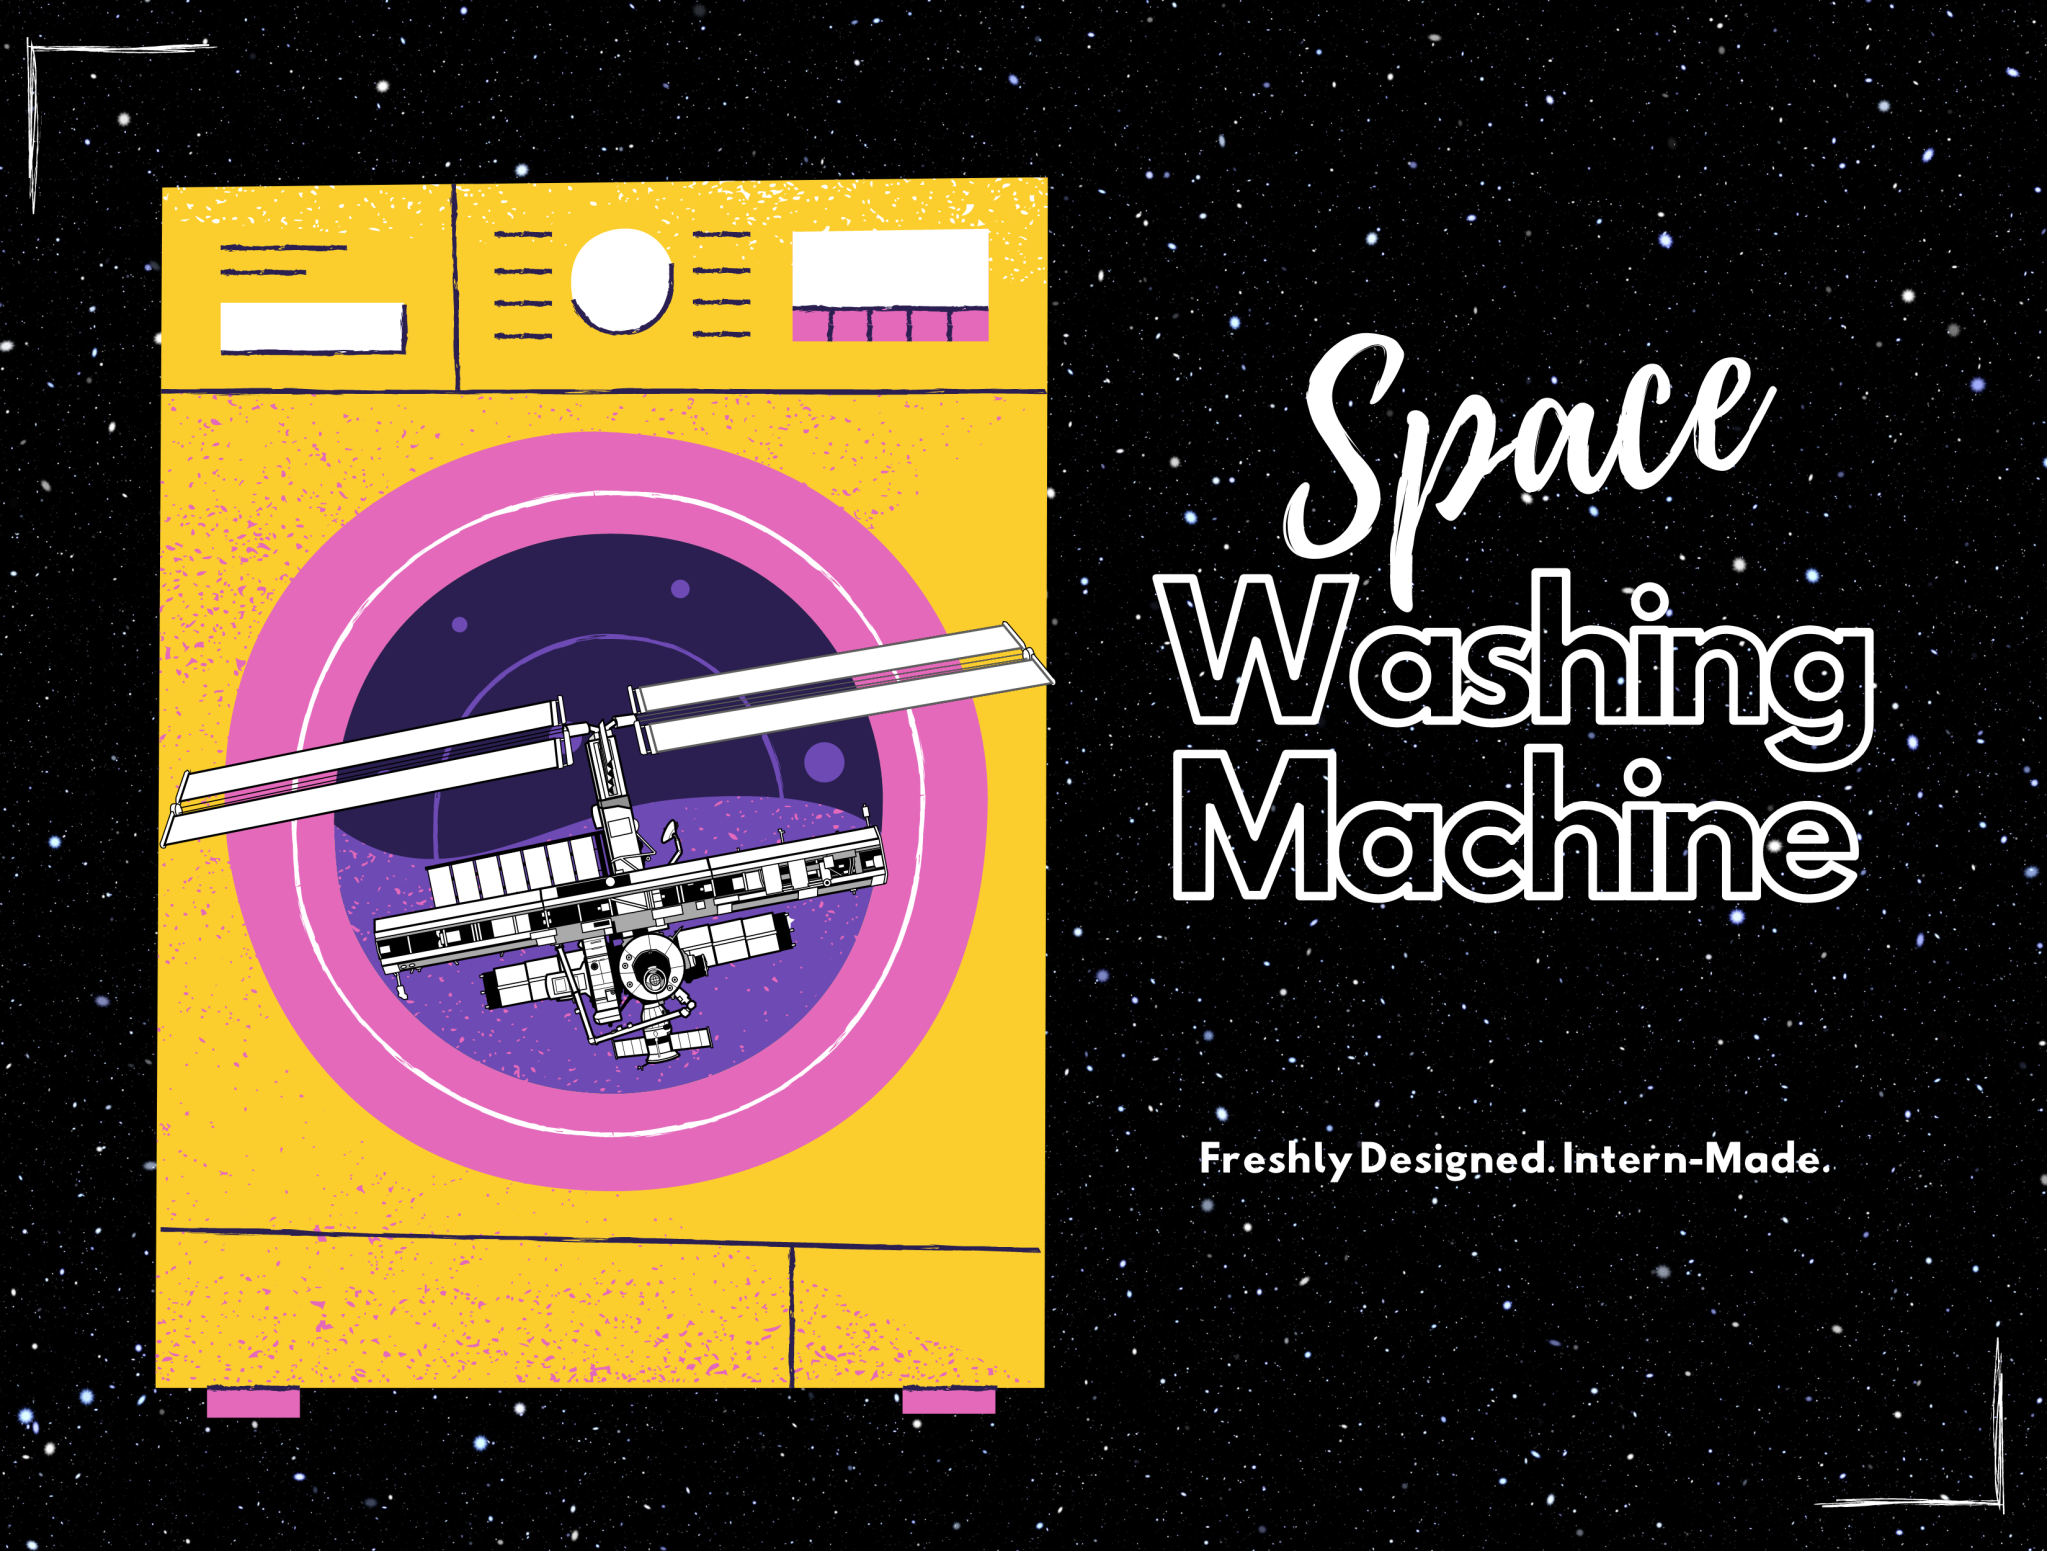 An illustration of the space station inside a washing machine, on a cosmic background, with the text “space washing machine.”